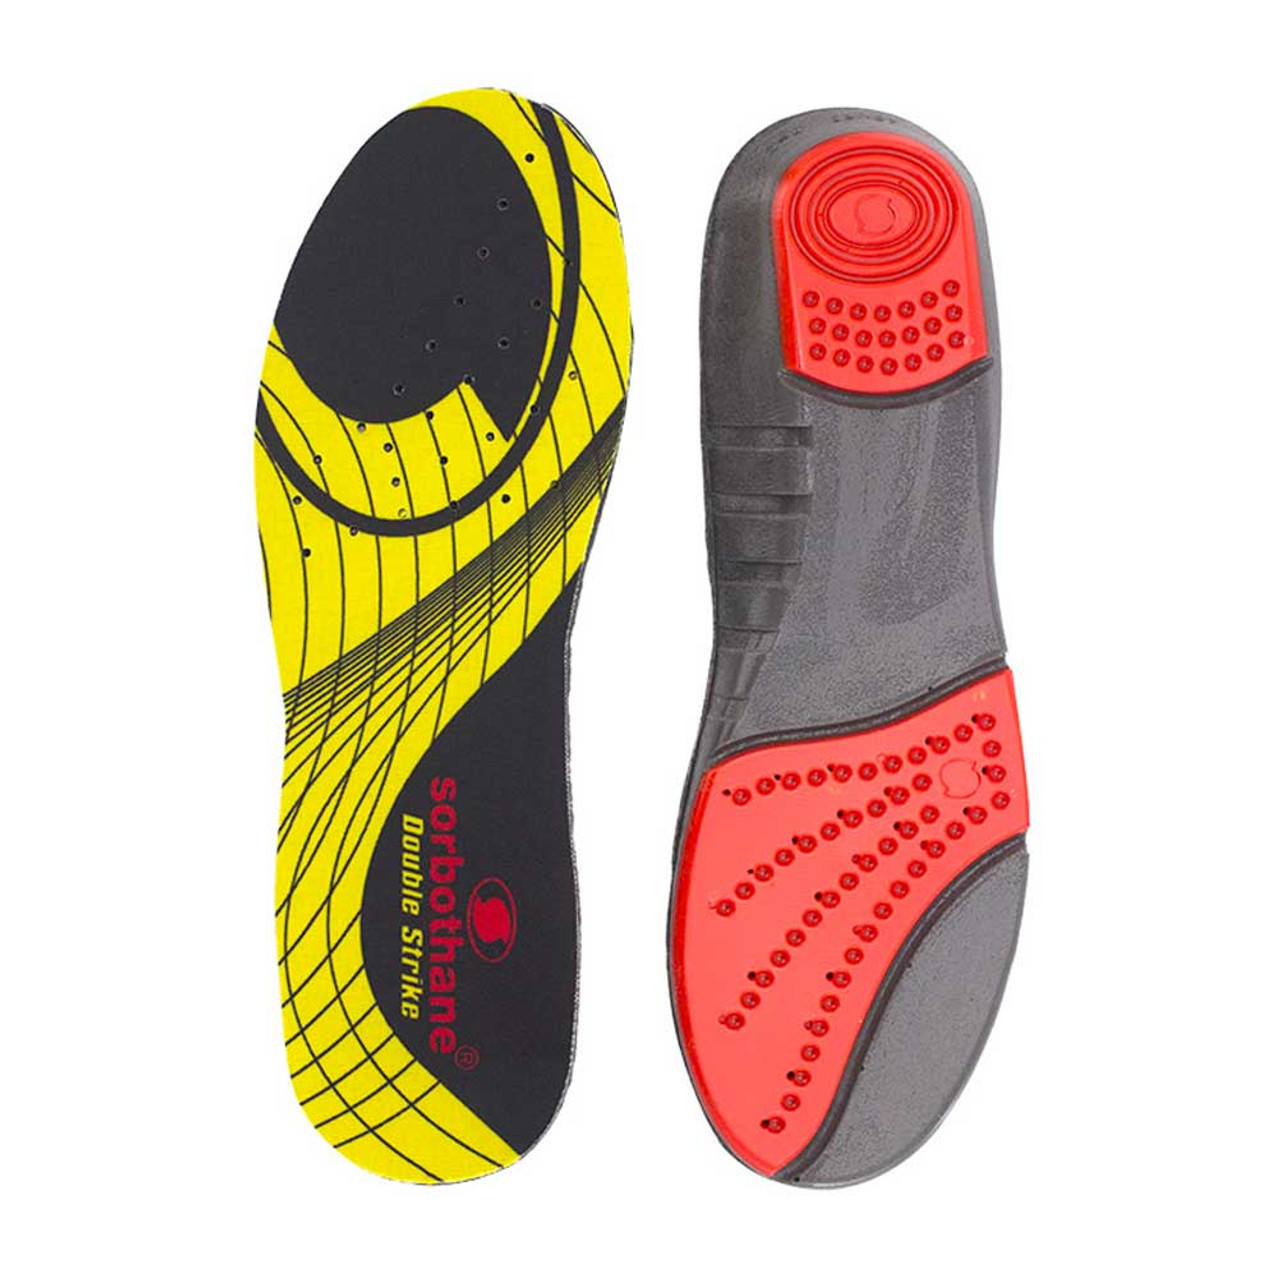 SORBOTHANE double strike insoles